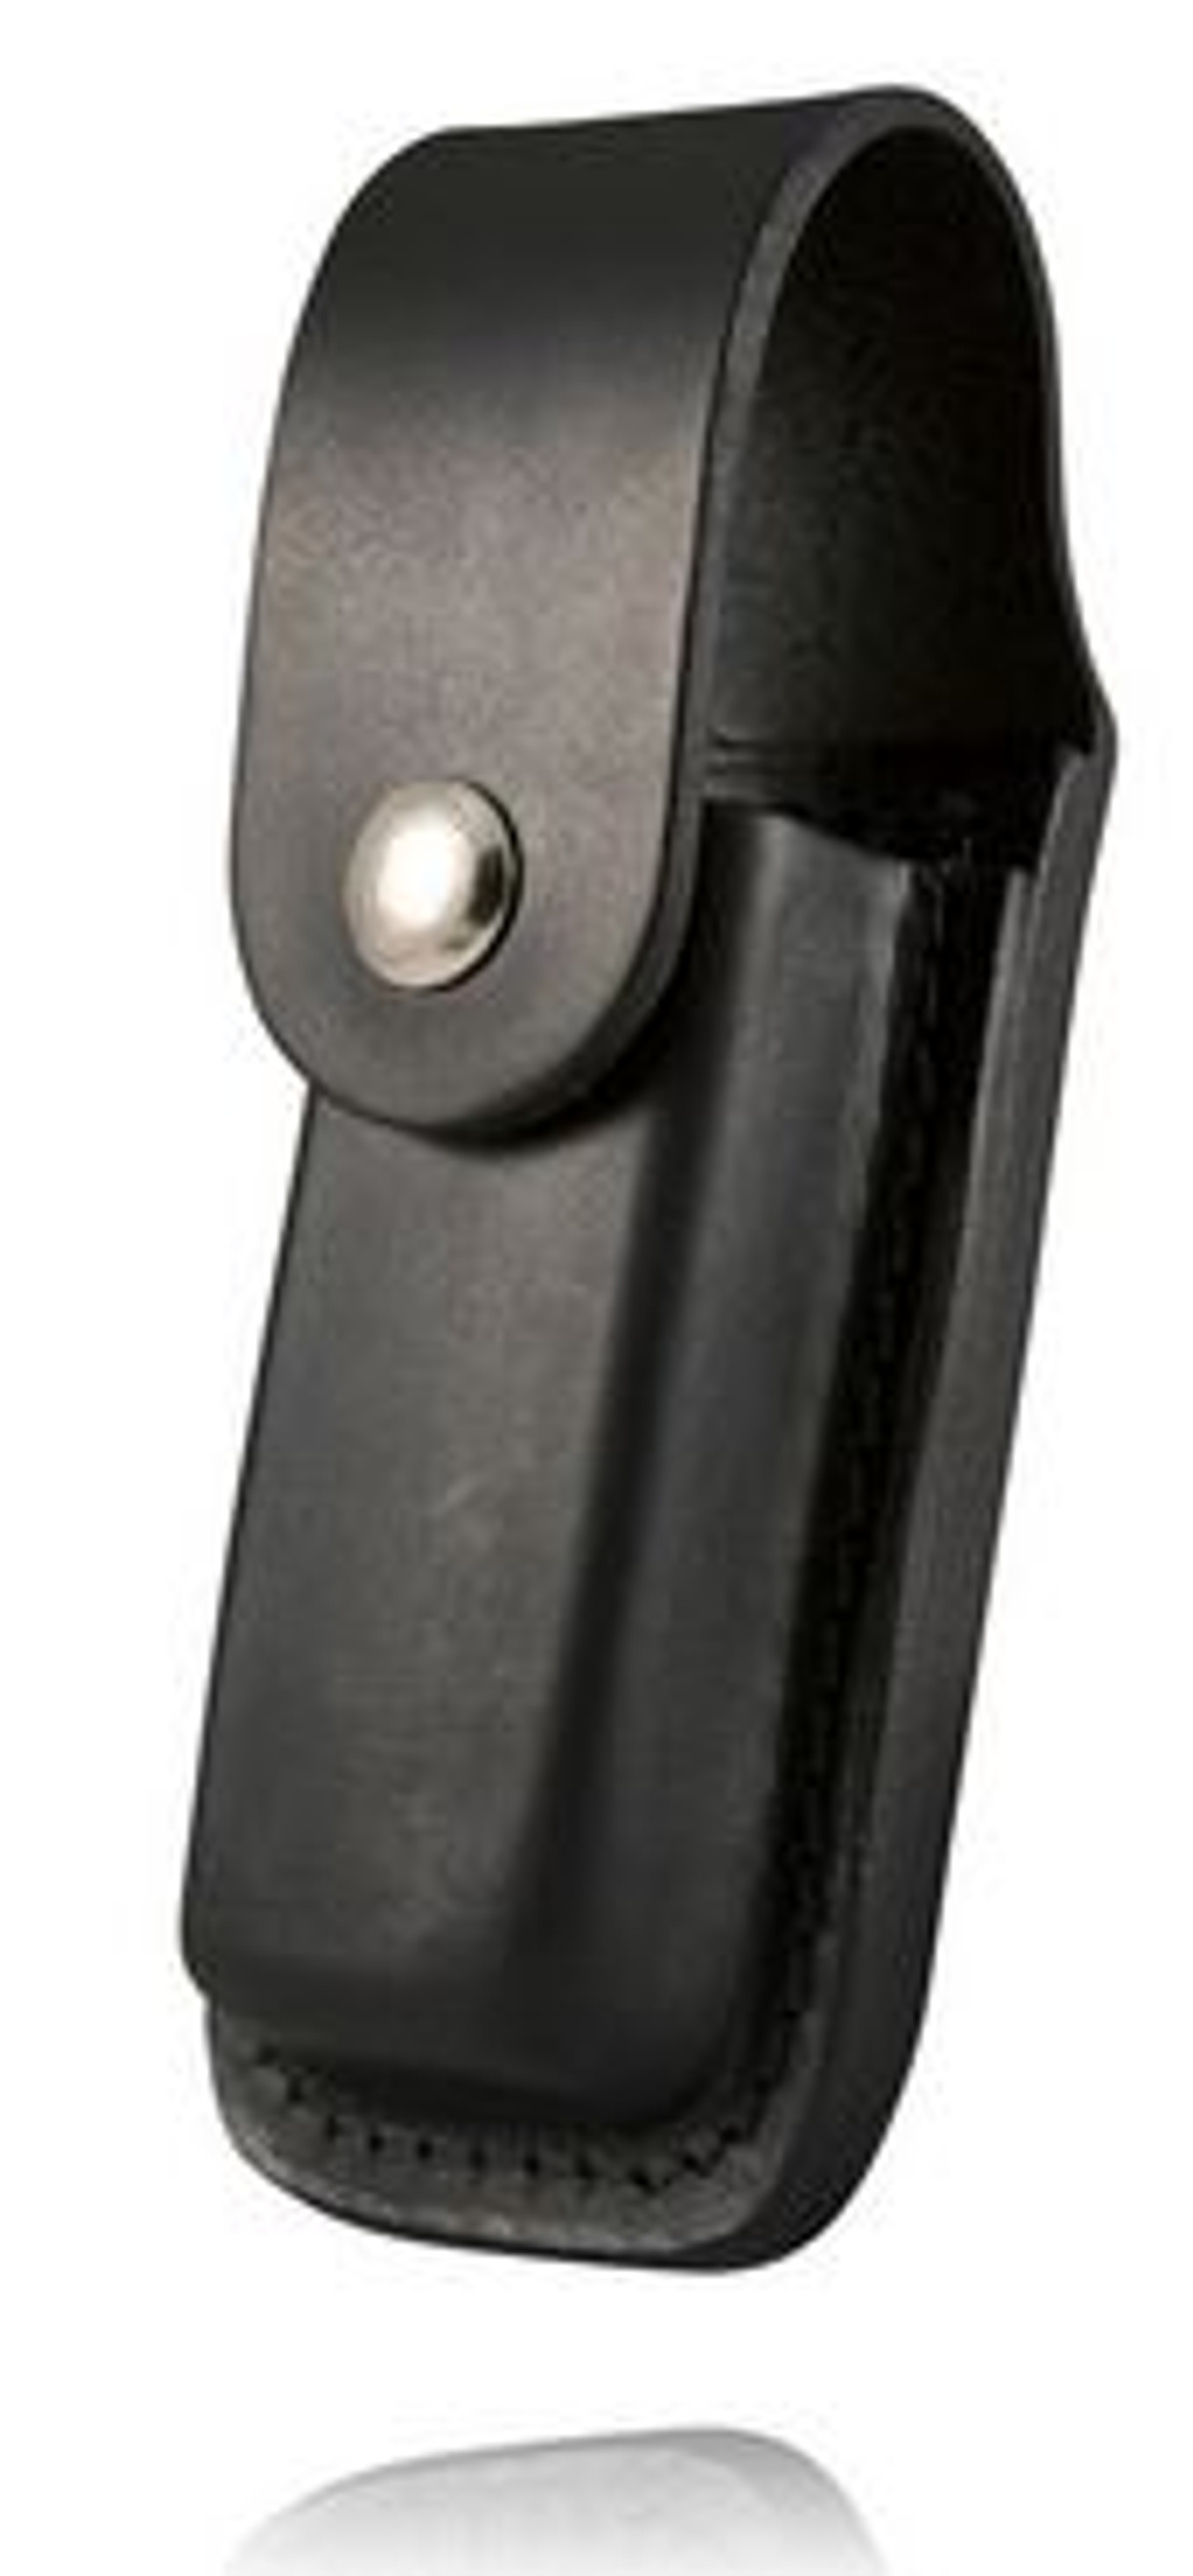 Boston Leather 5603 Single Mag Holder for .45